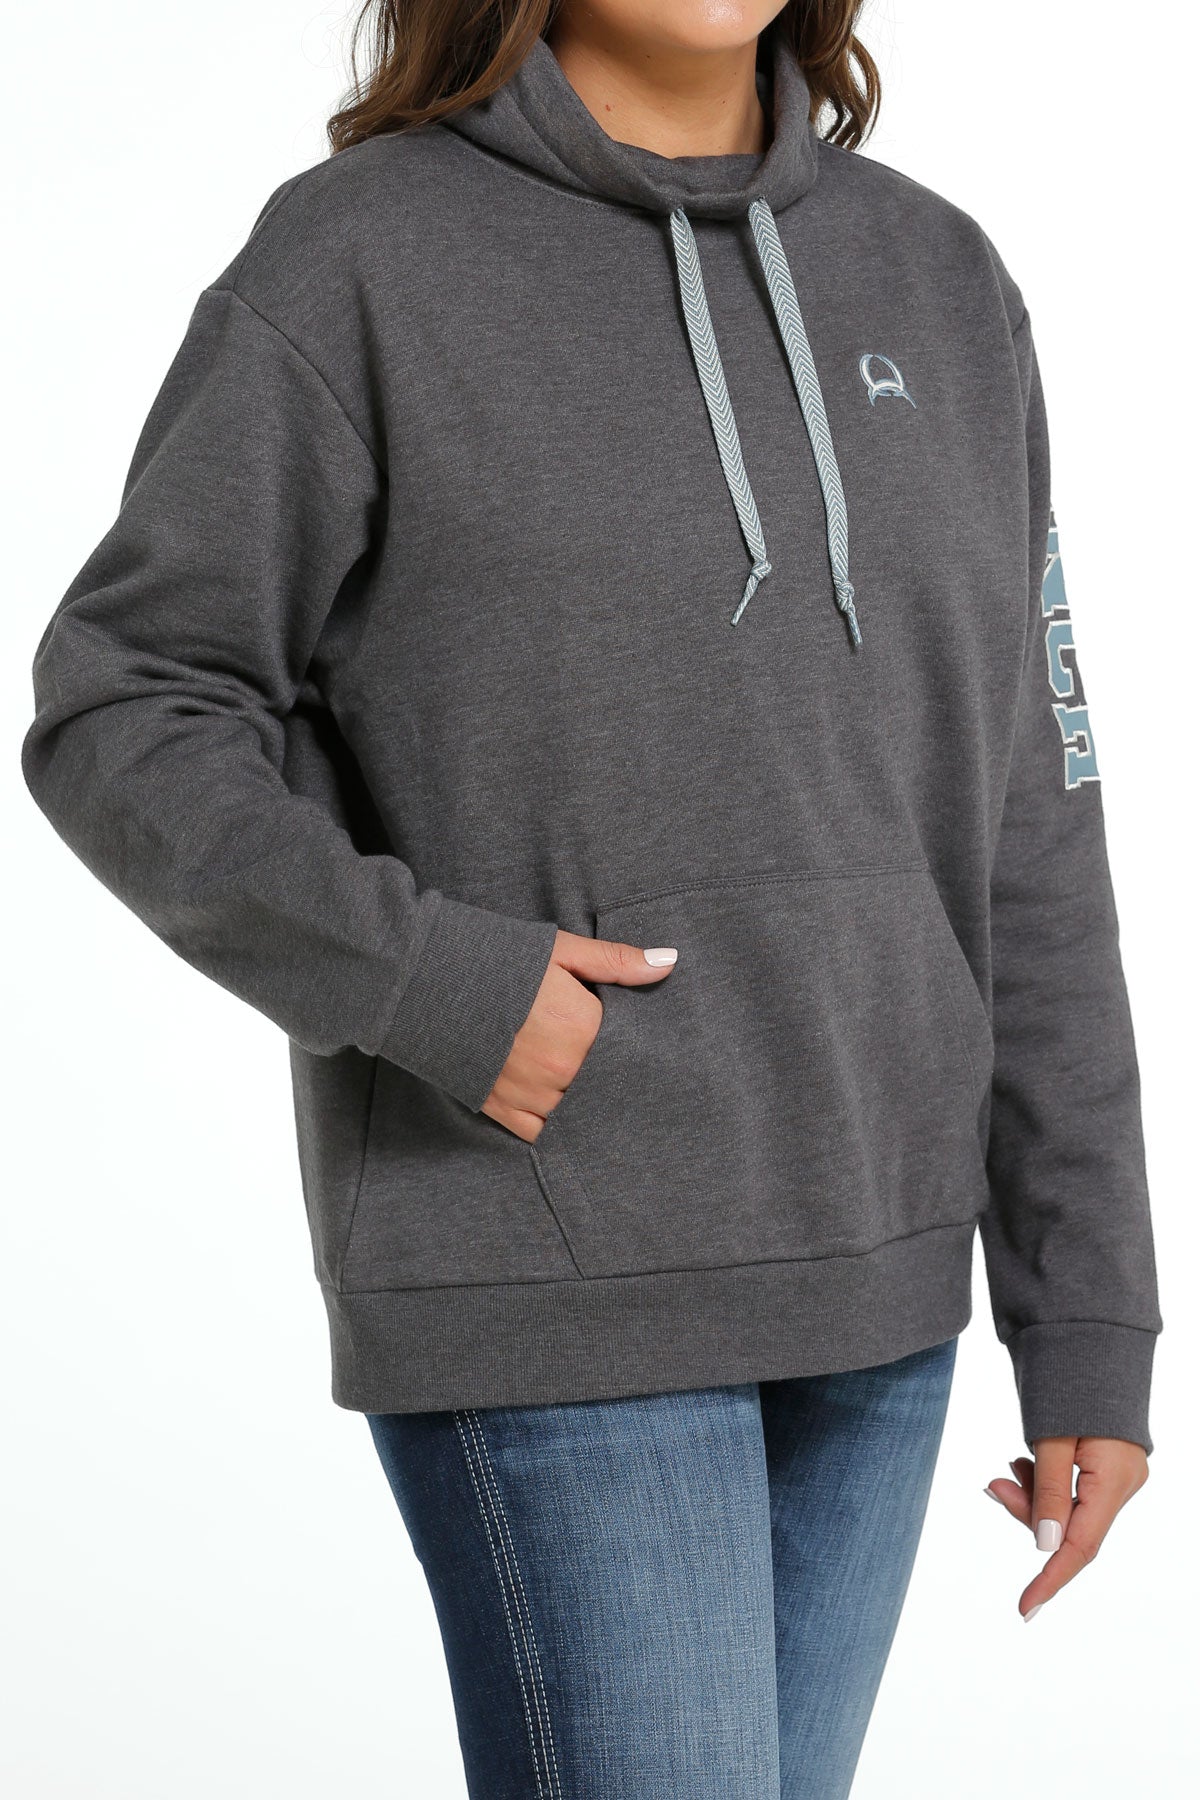 CINCH Women's Gray French Terry Pullover